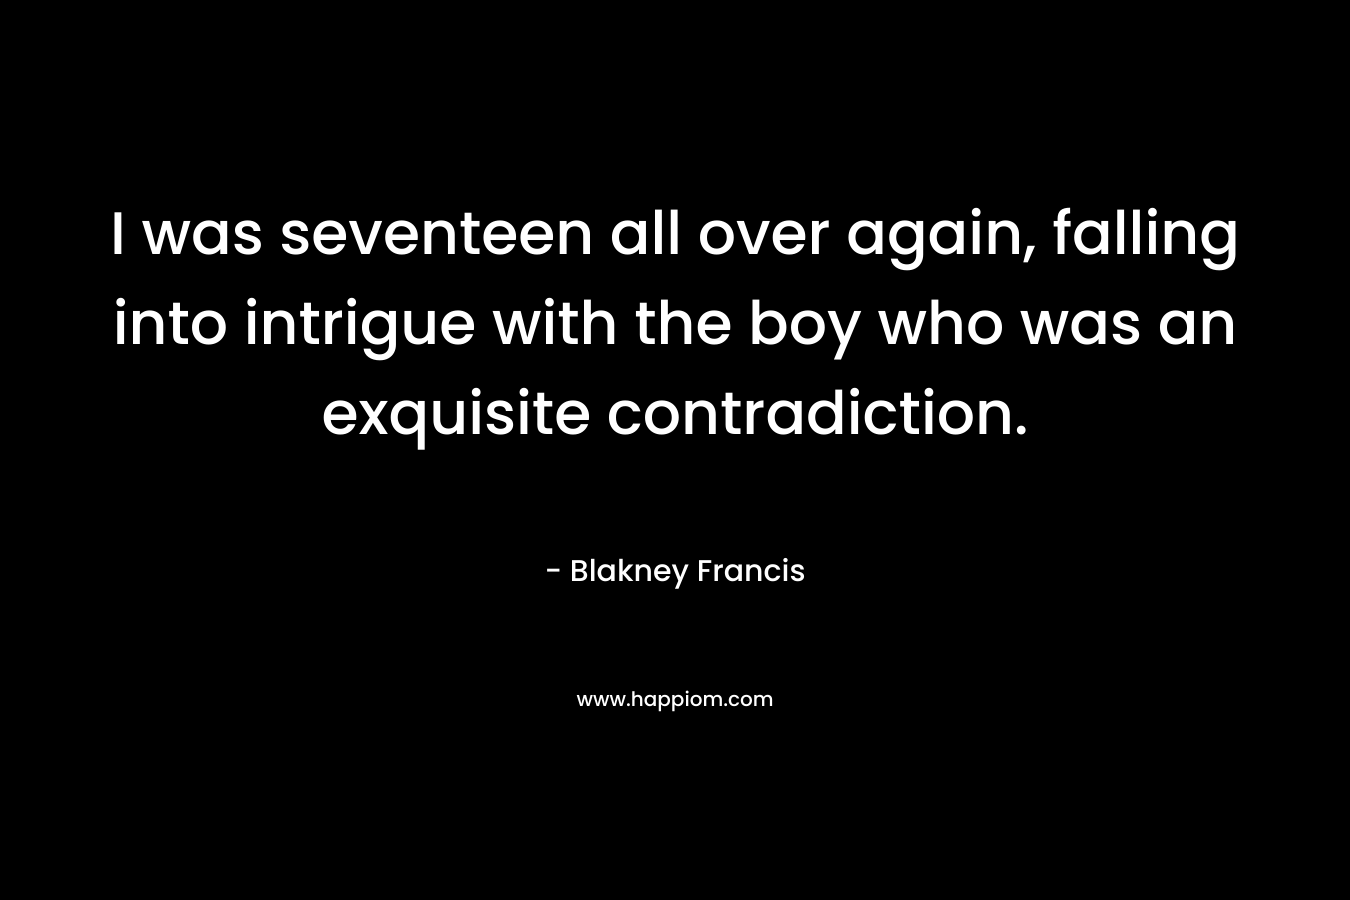 I was seventeen all over again, falling into intrigue with the boy who was an exquisite contradiction. – Blakney Francis